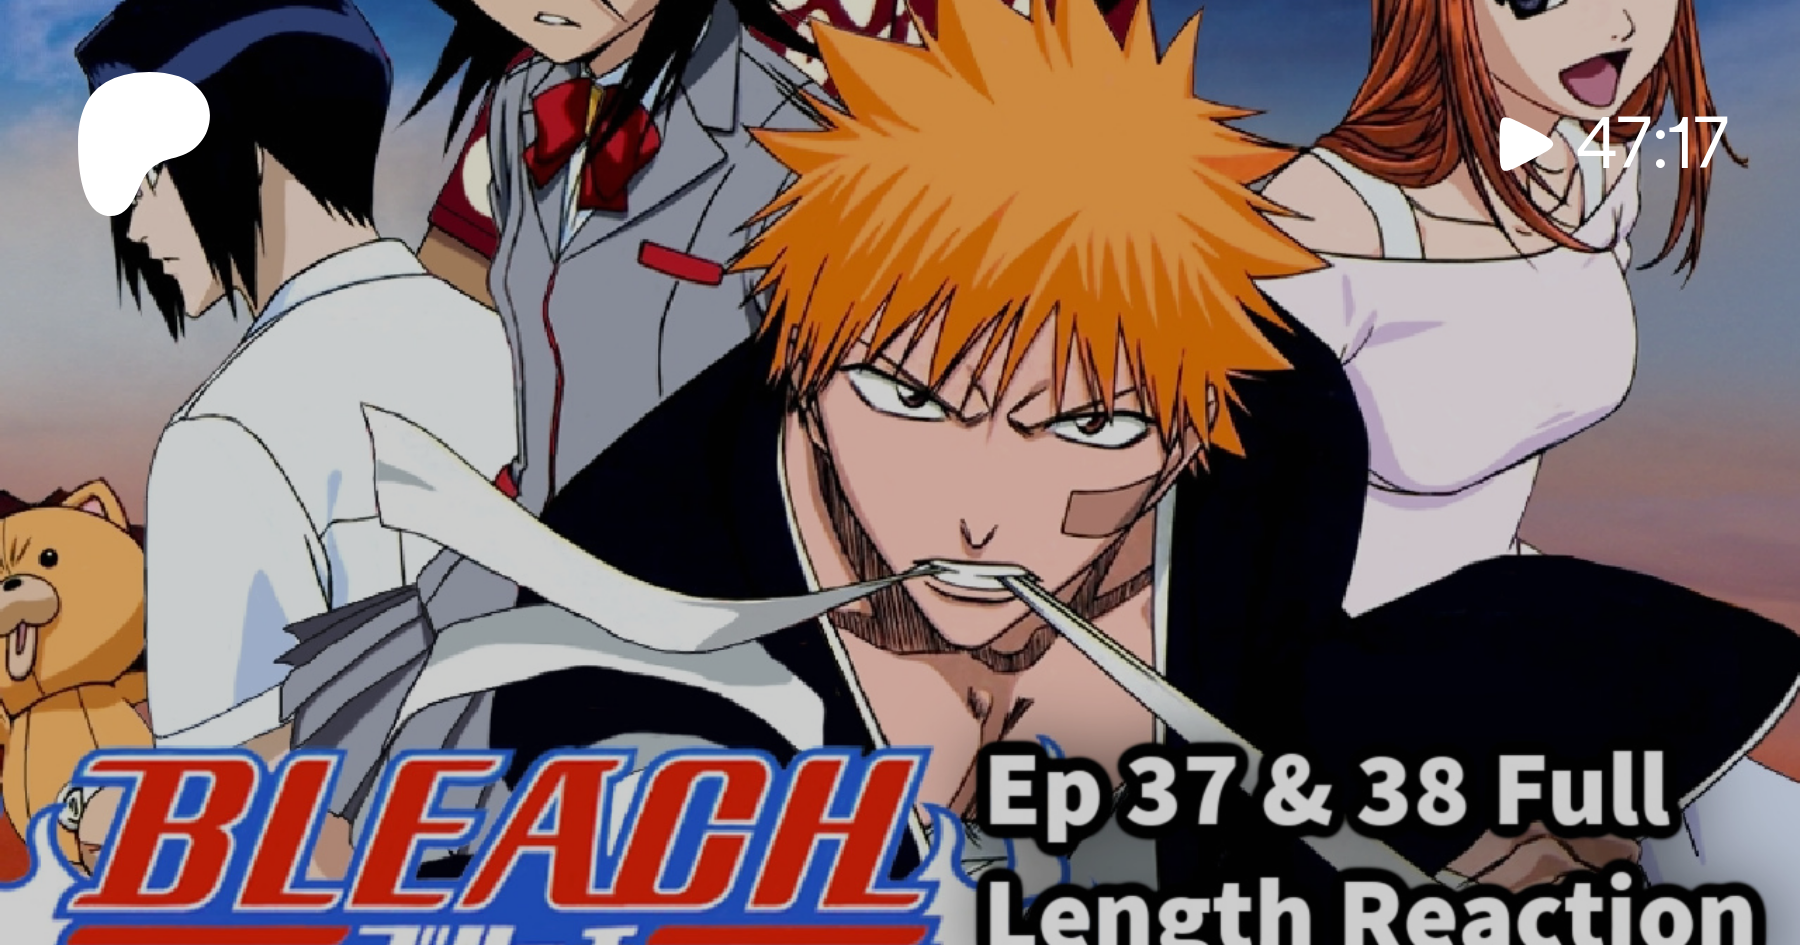 BLEACH Episode 138 REACTION (FULL) by Project Senpai from Patreon